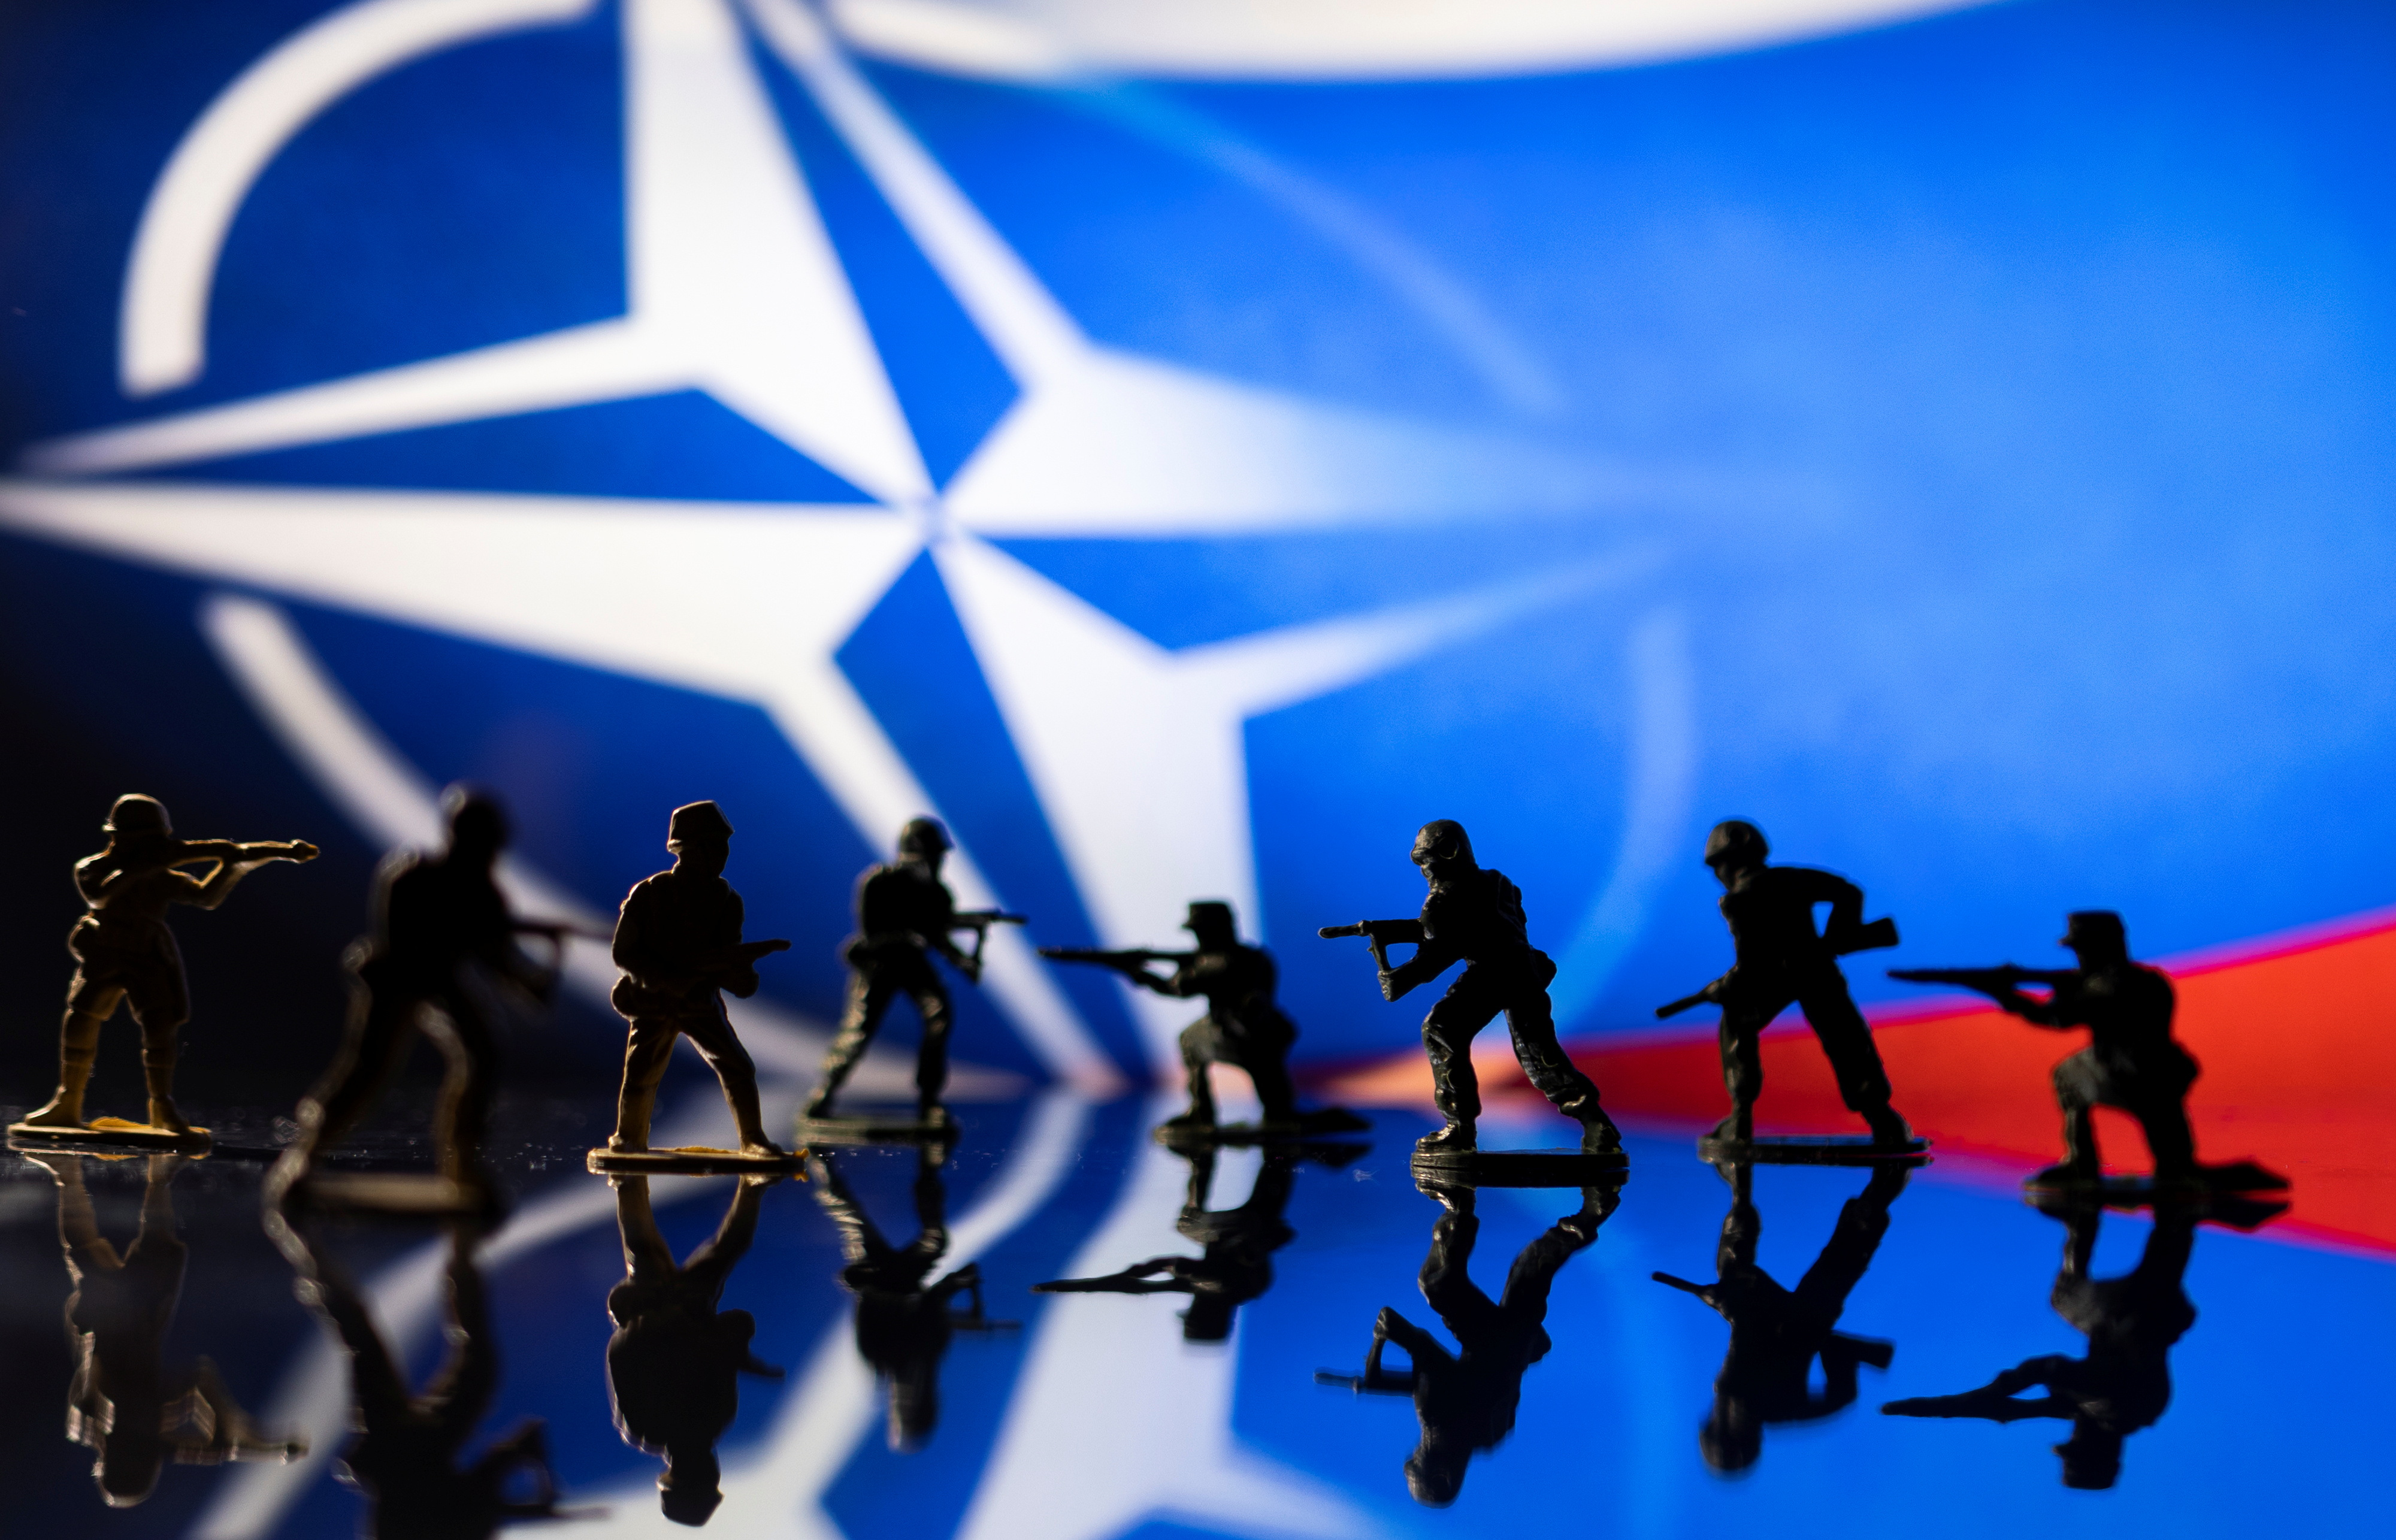 Illustration shows army figurines on NATO logo and Russian flag colours background